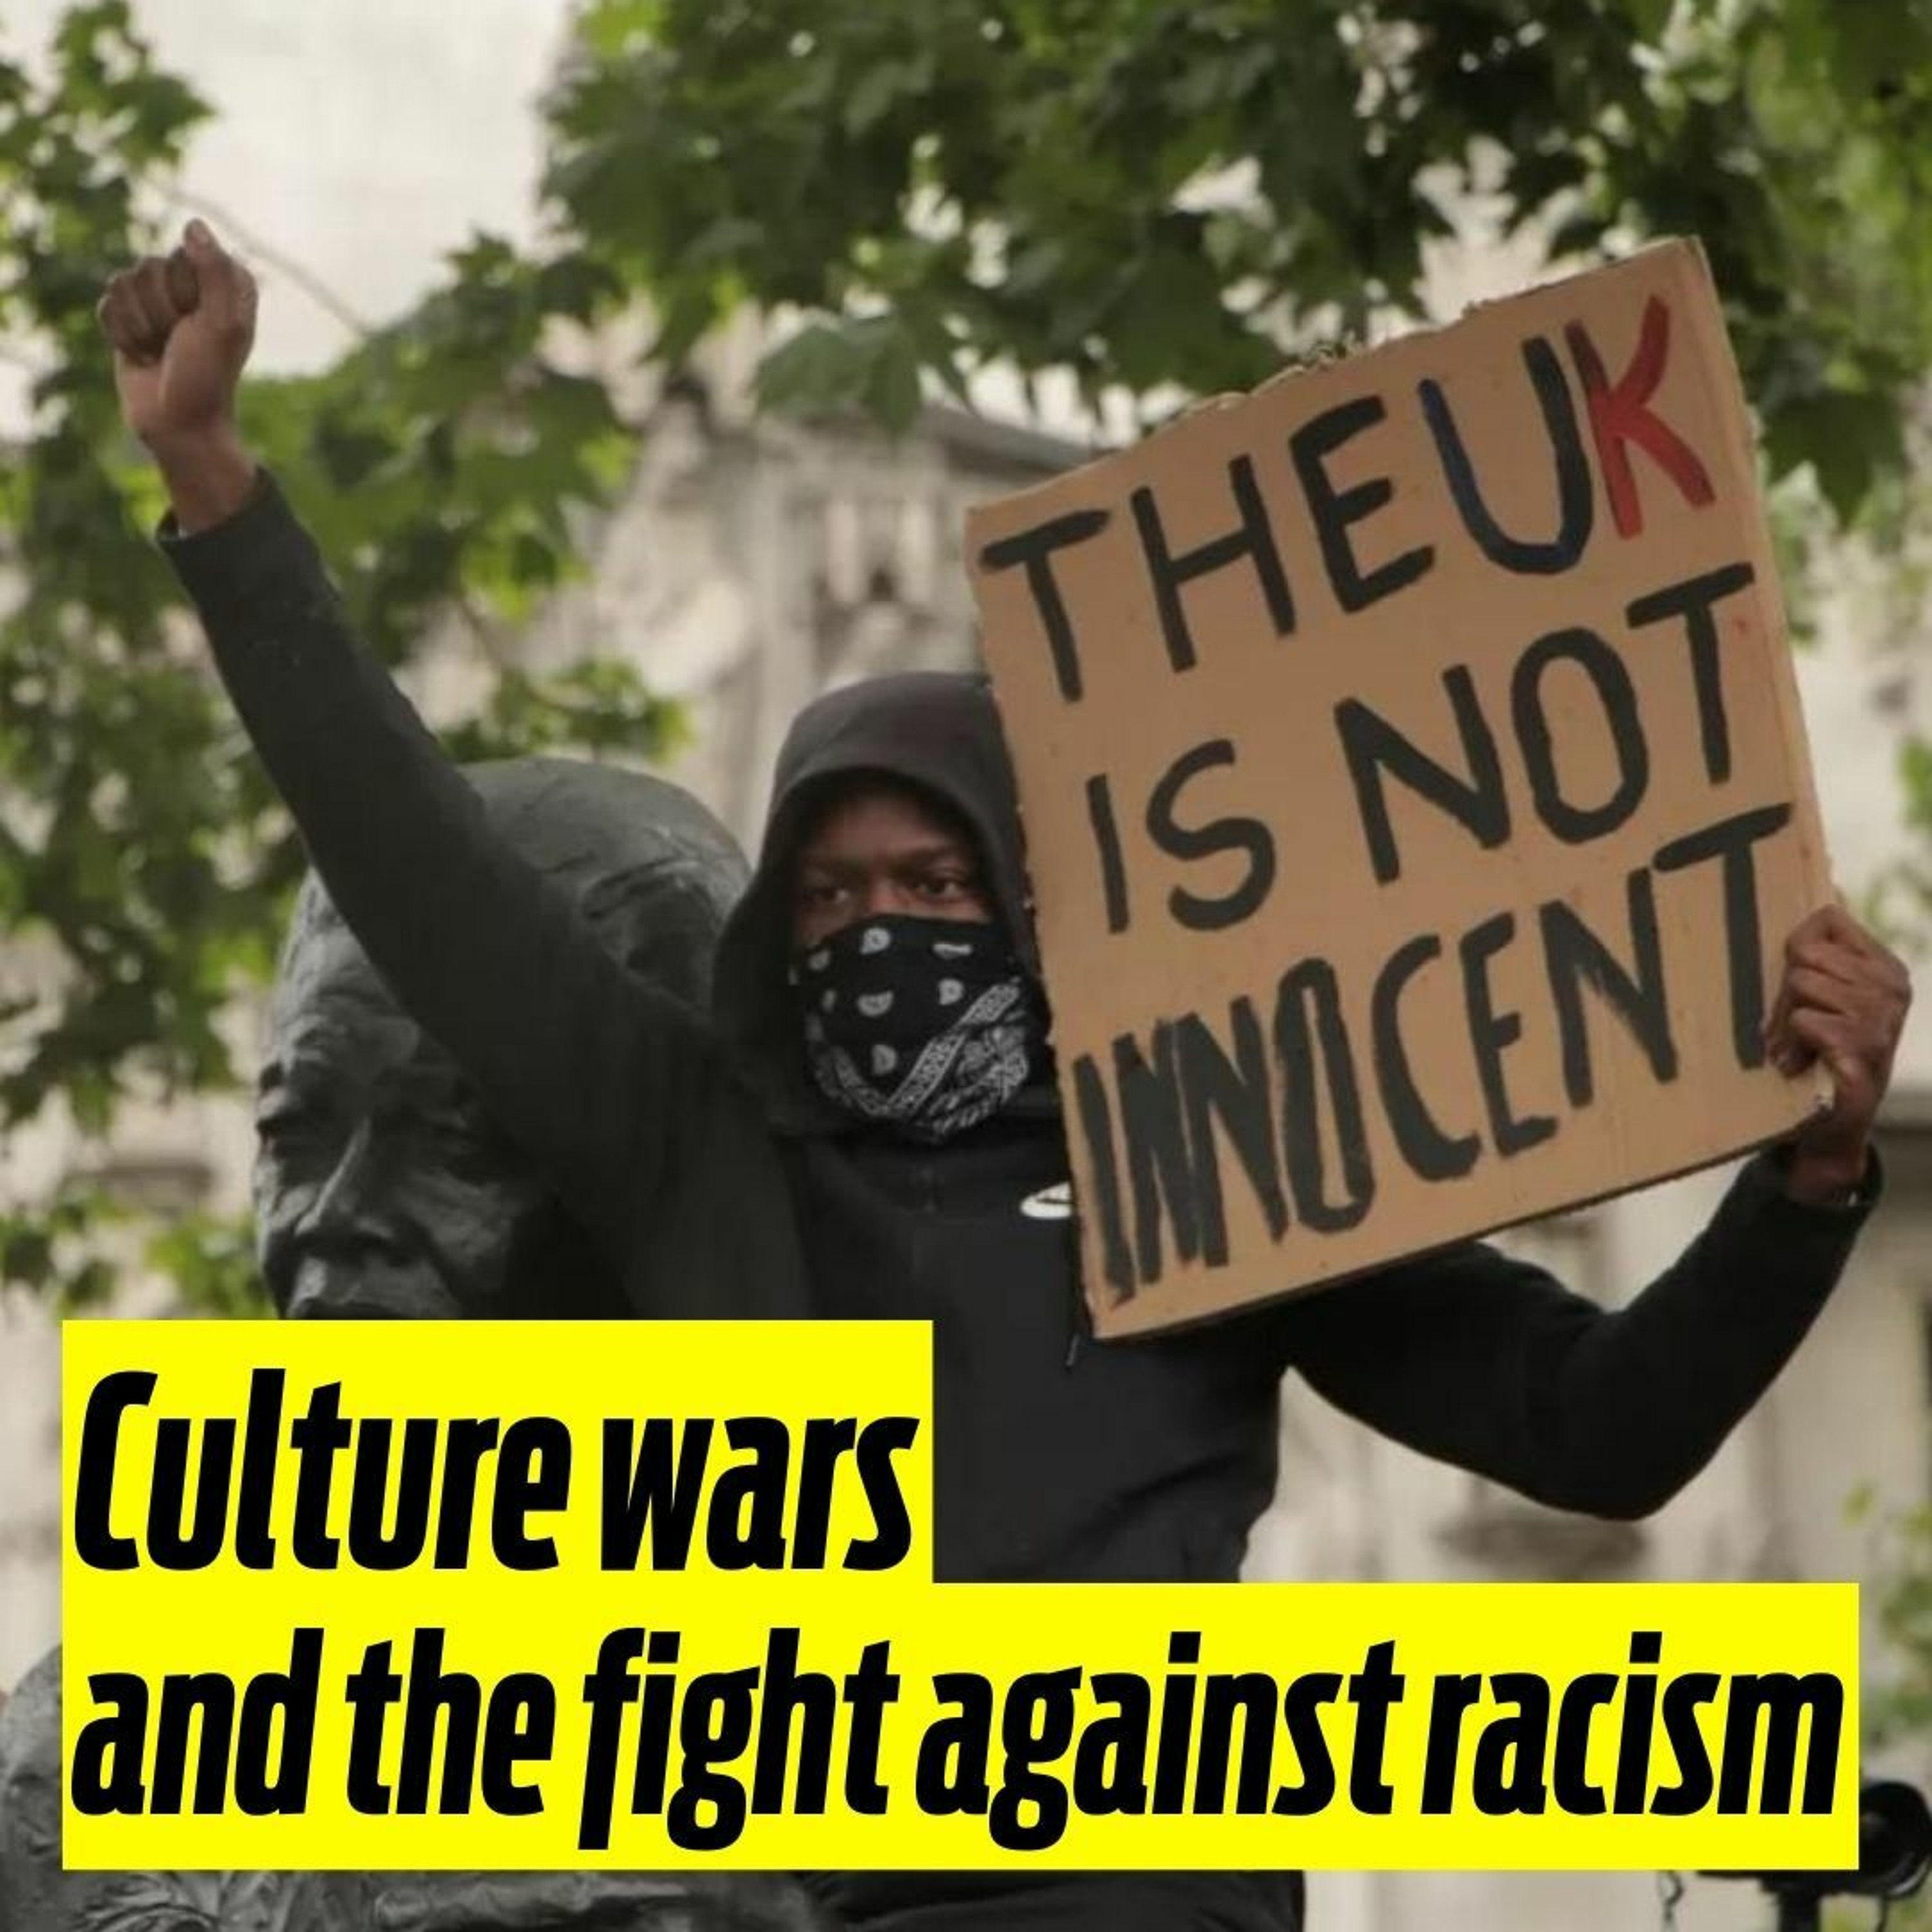 Culture wars and the fight against racism